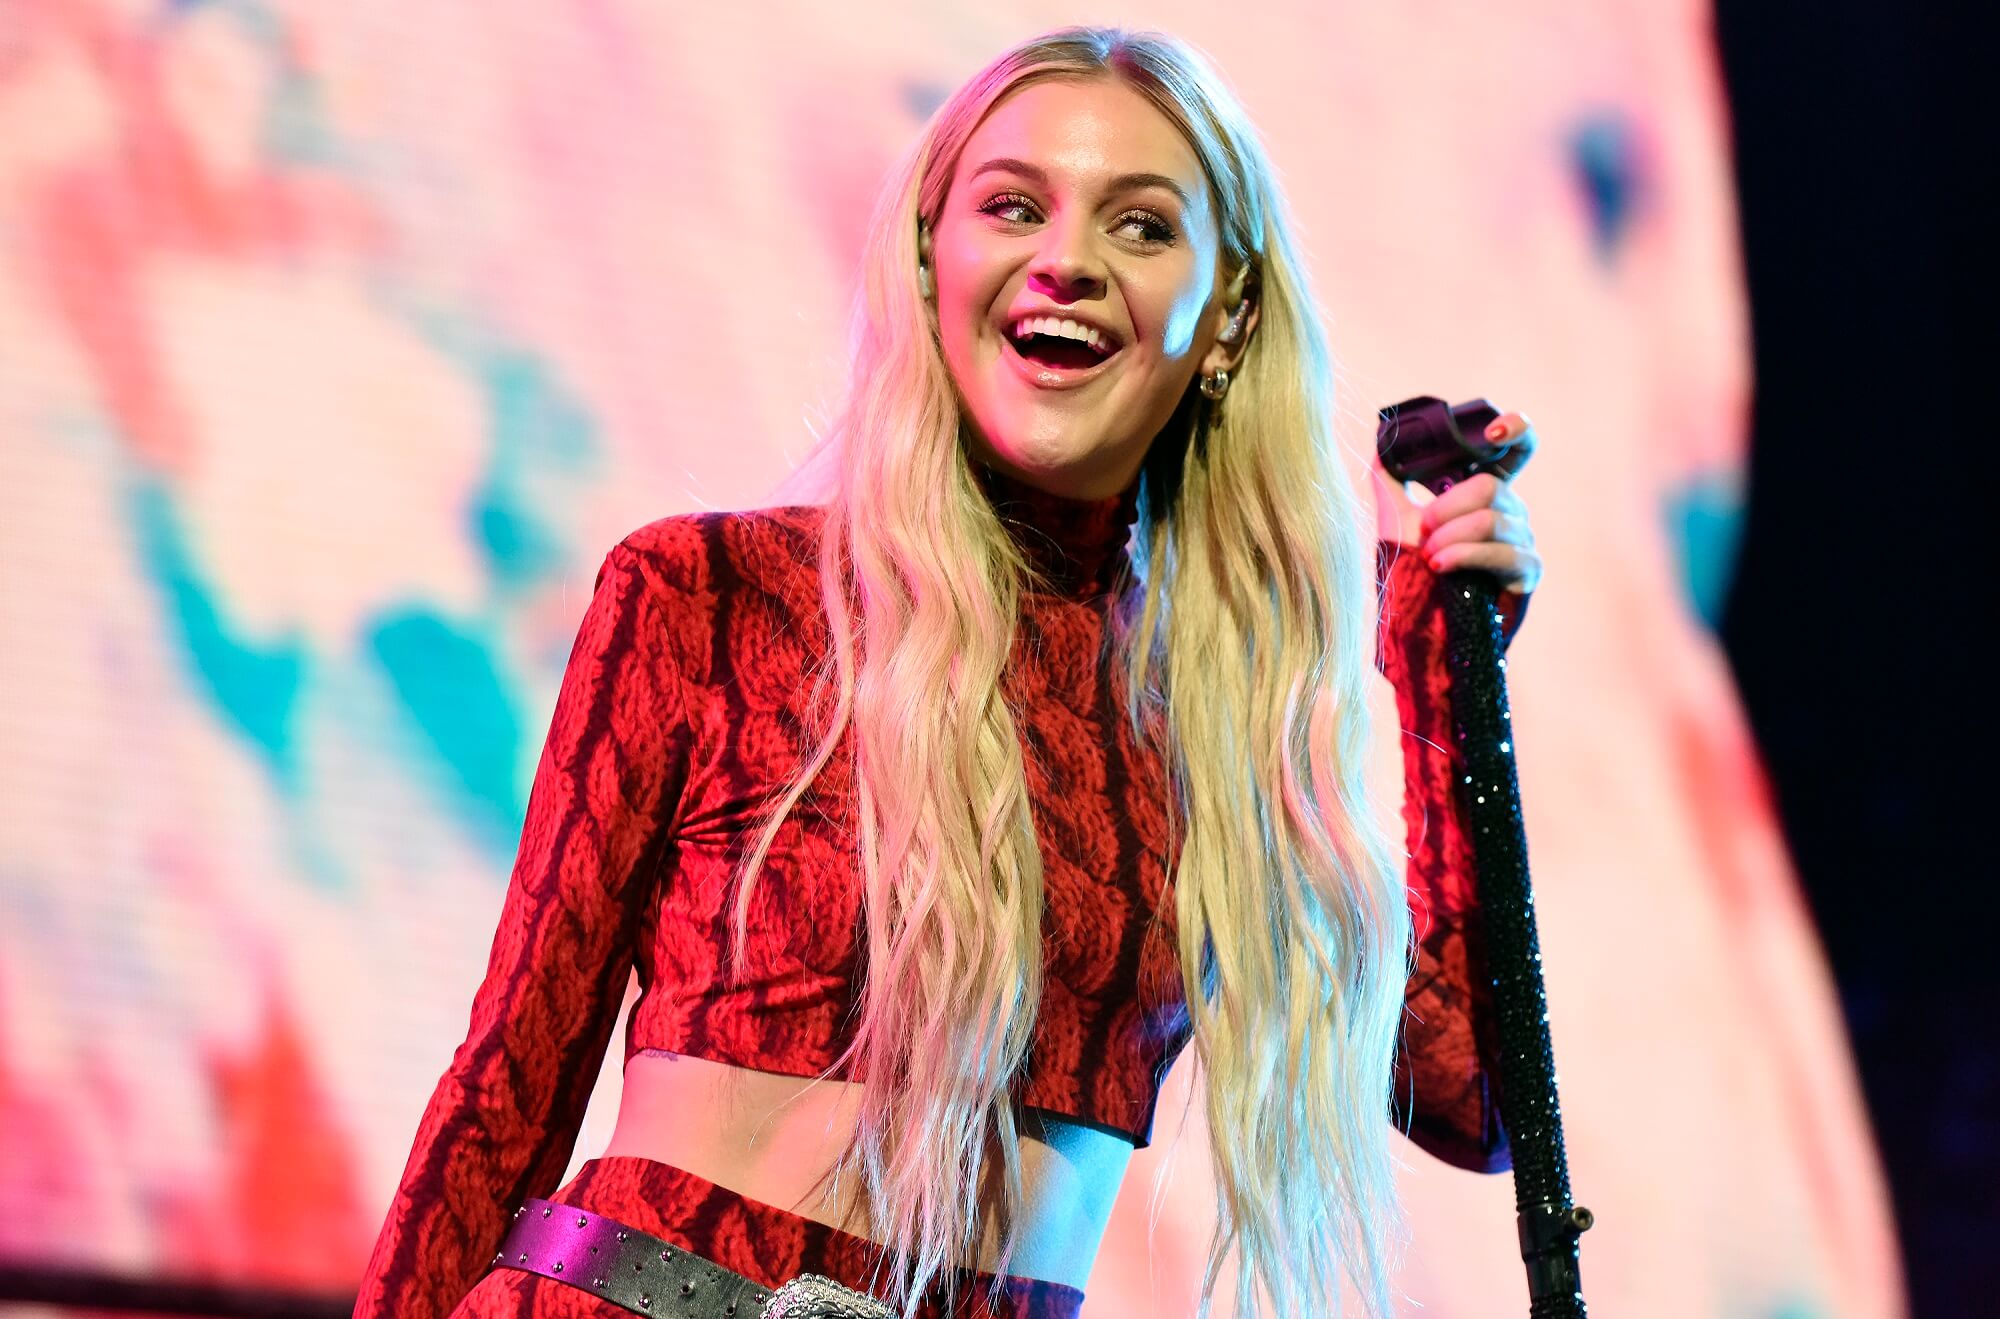 Kelsea Ballerini smiles on stage while holding a microphone stand